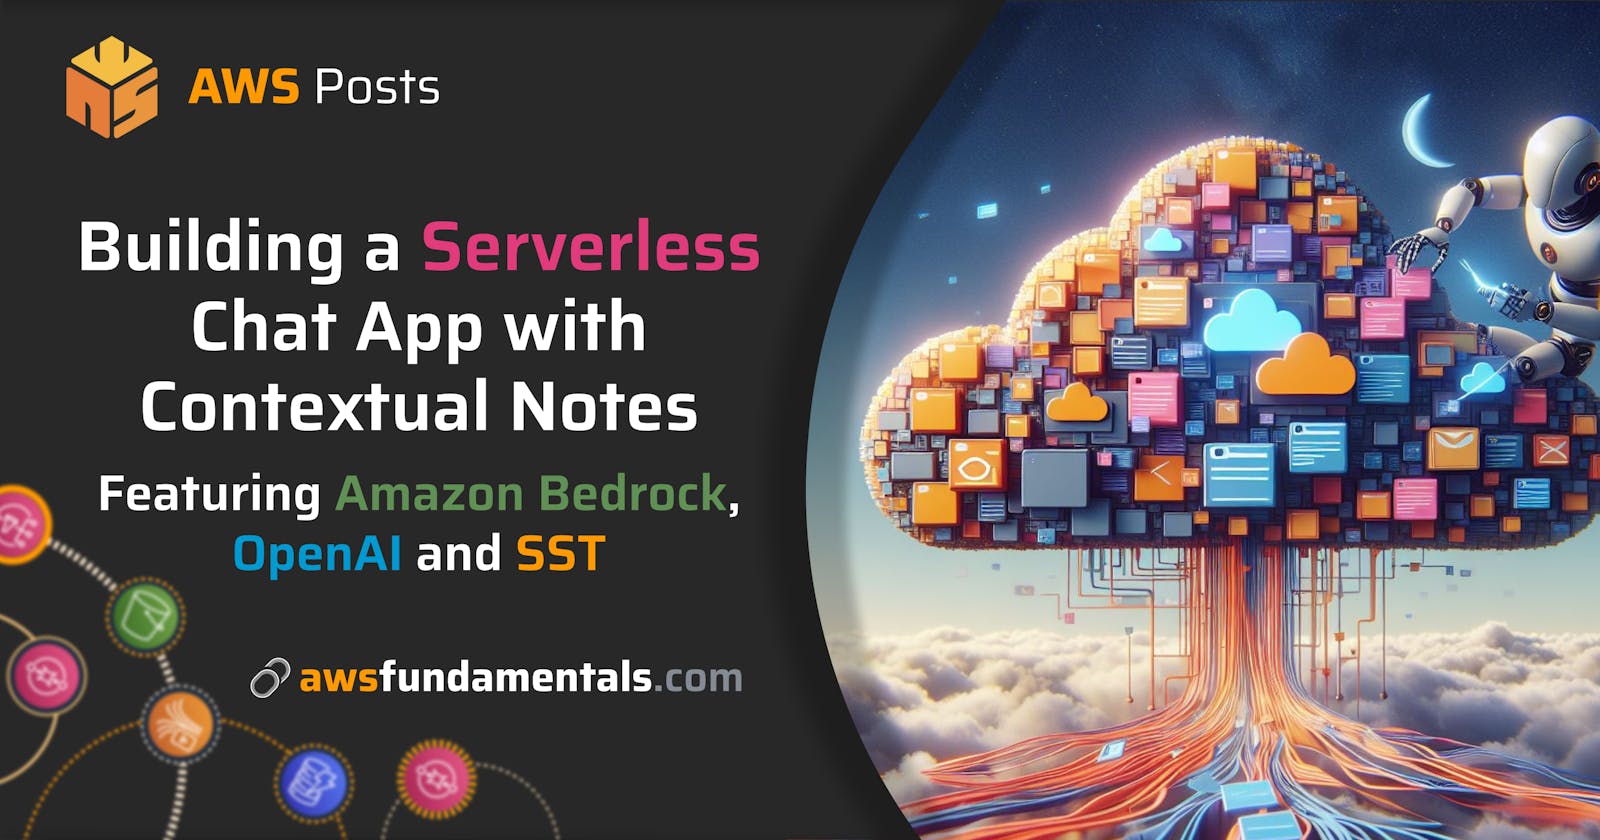 Building a Serverless Chat App with Contextual Note Integration Featuring Amazon Bedrock, the OpenAI API, and SST